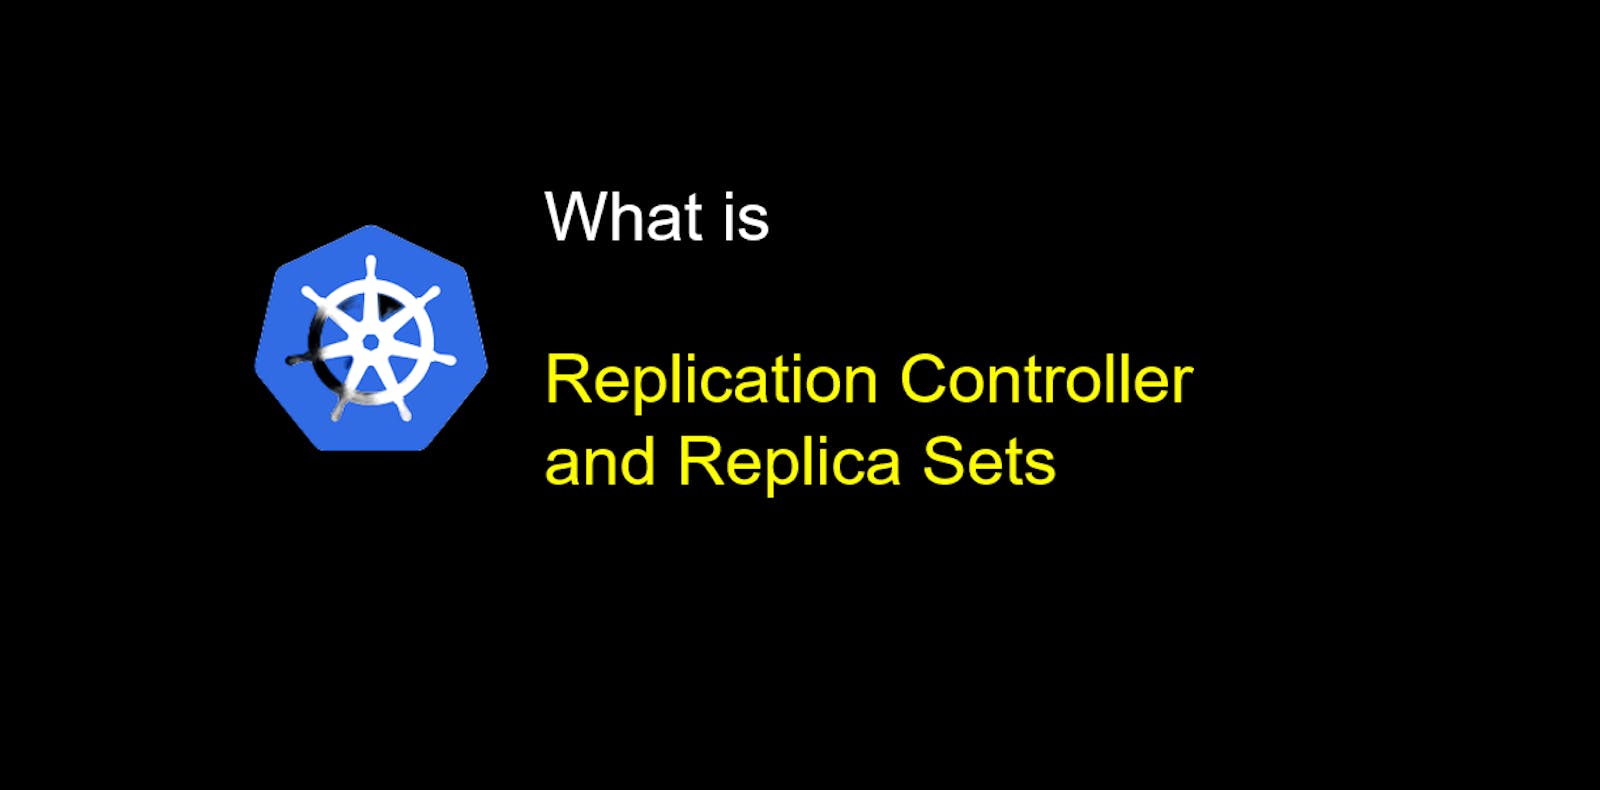 Kubernetes Concepts - ReplicationController and Replica Sets